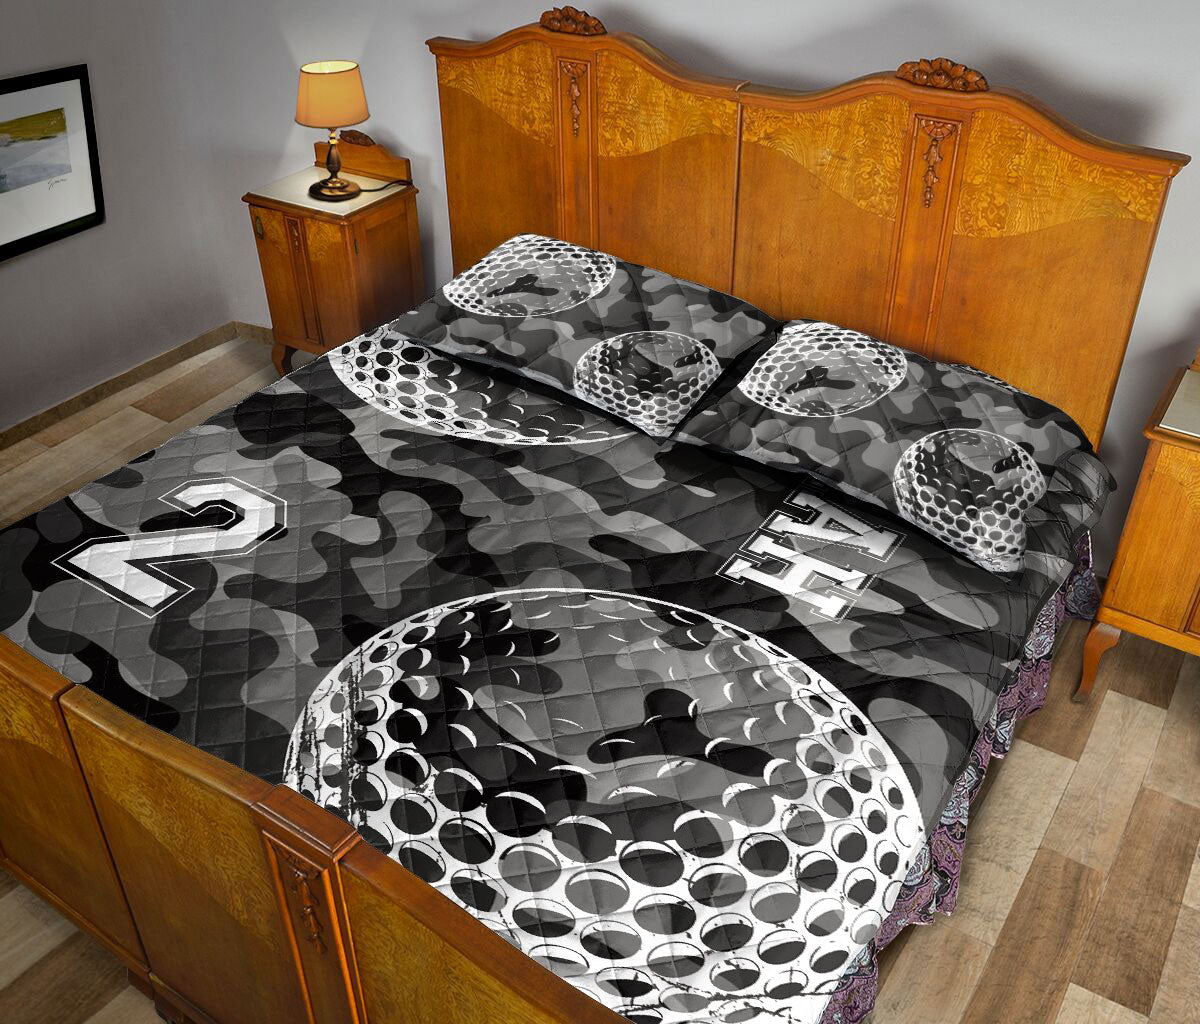 Ohaprints-Quilt-Bed-Set-Pillowcase-Golf-Black-Camo-Pattern-Sports-Fan-Gift-Custom-Personalized-Name-Number-Blanket-Bedspread-Bedding-154-Queen (80'' x 90'')